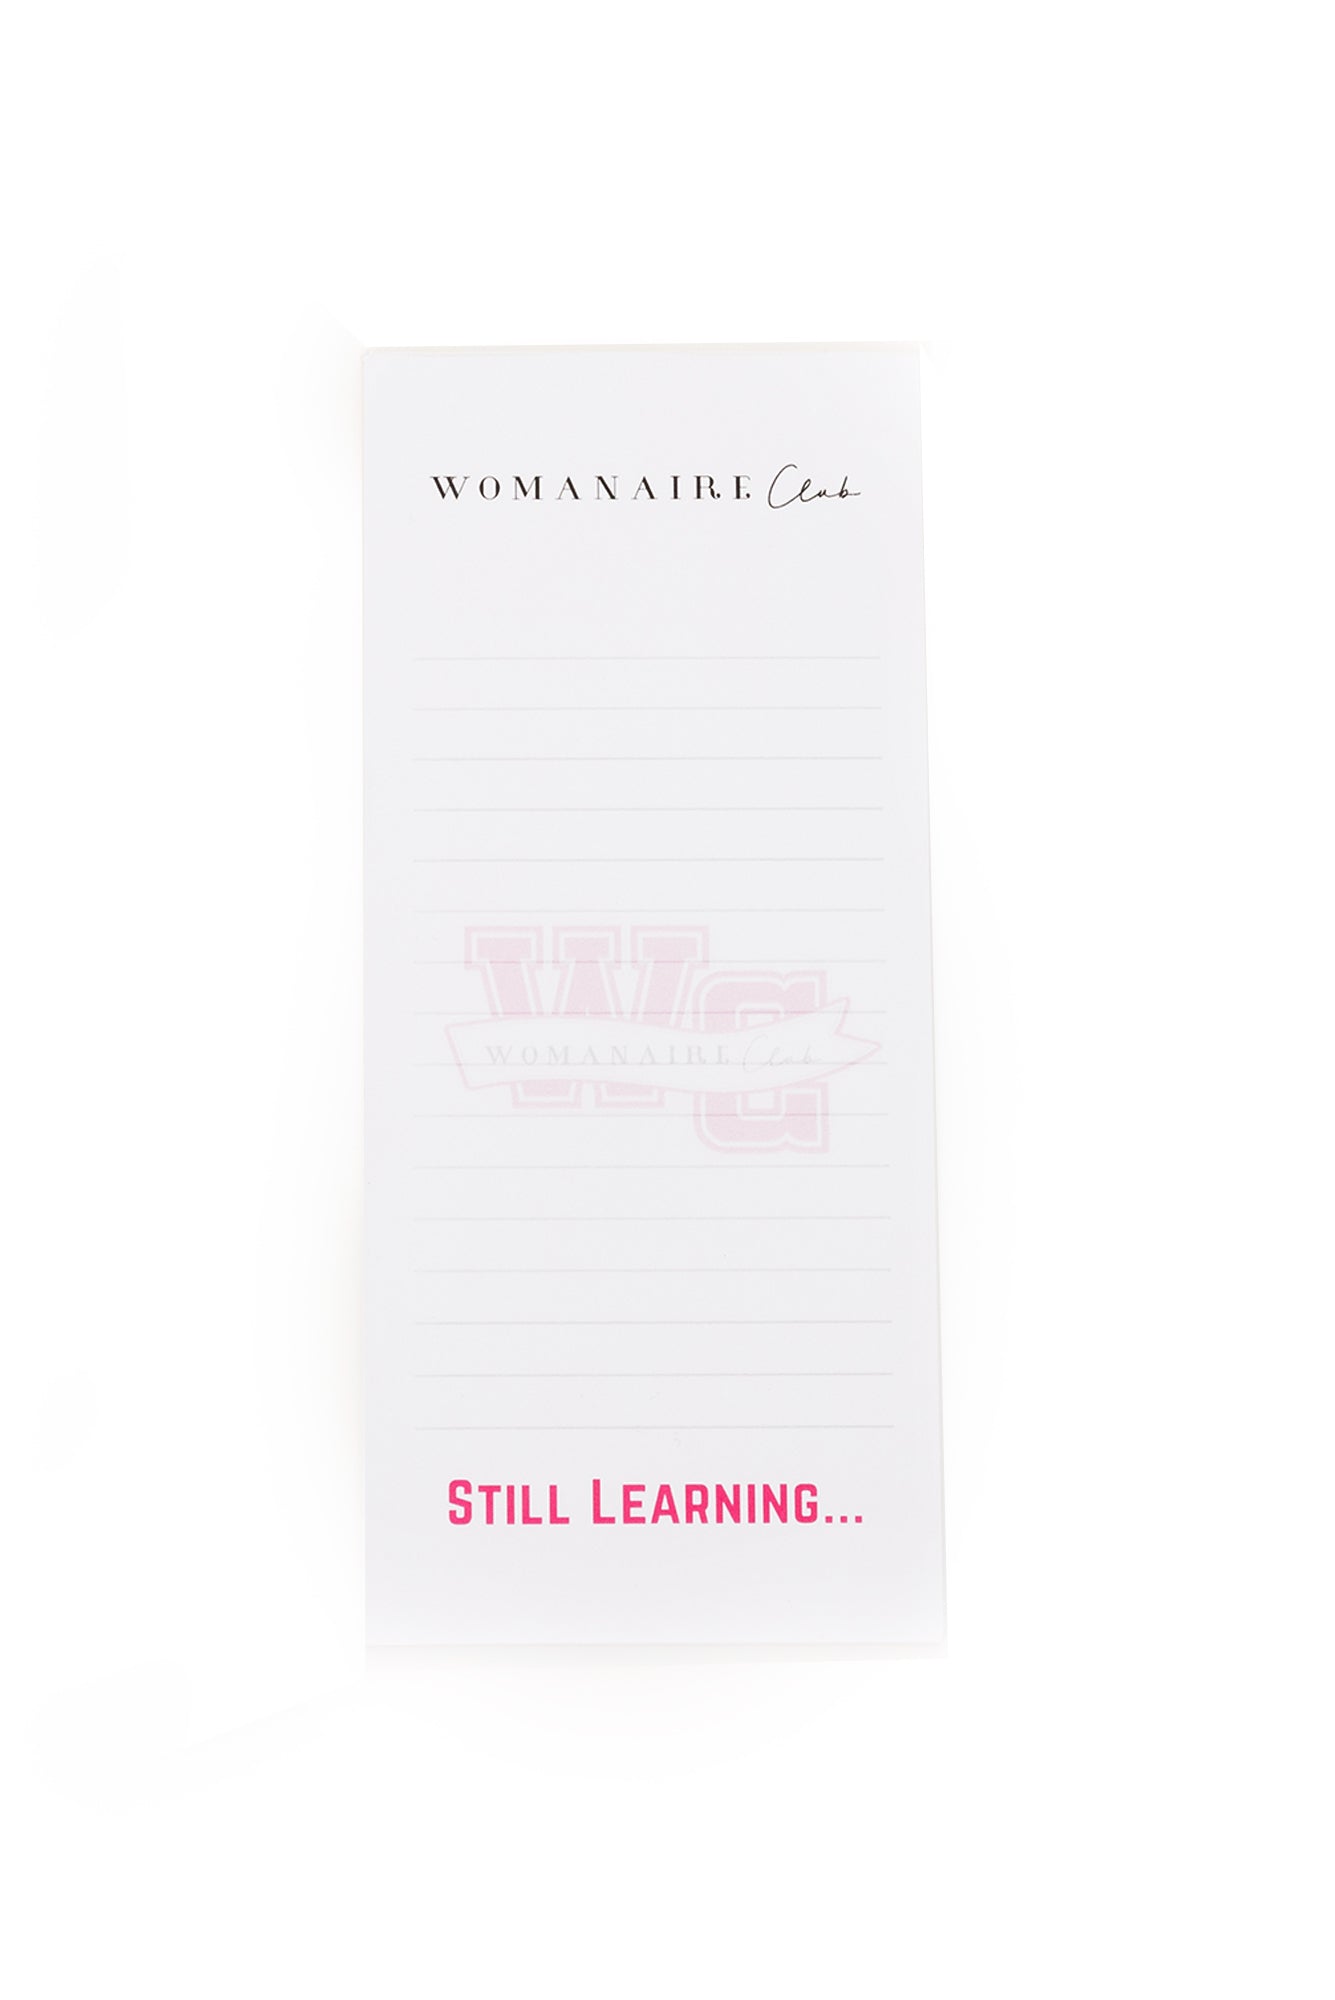 Womanaire Bedside Notepad